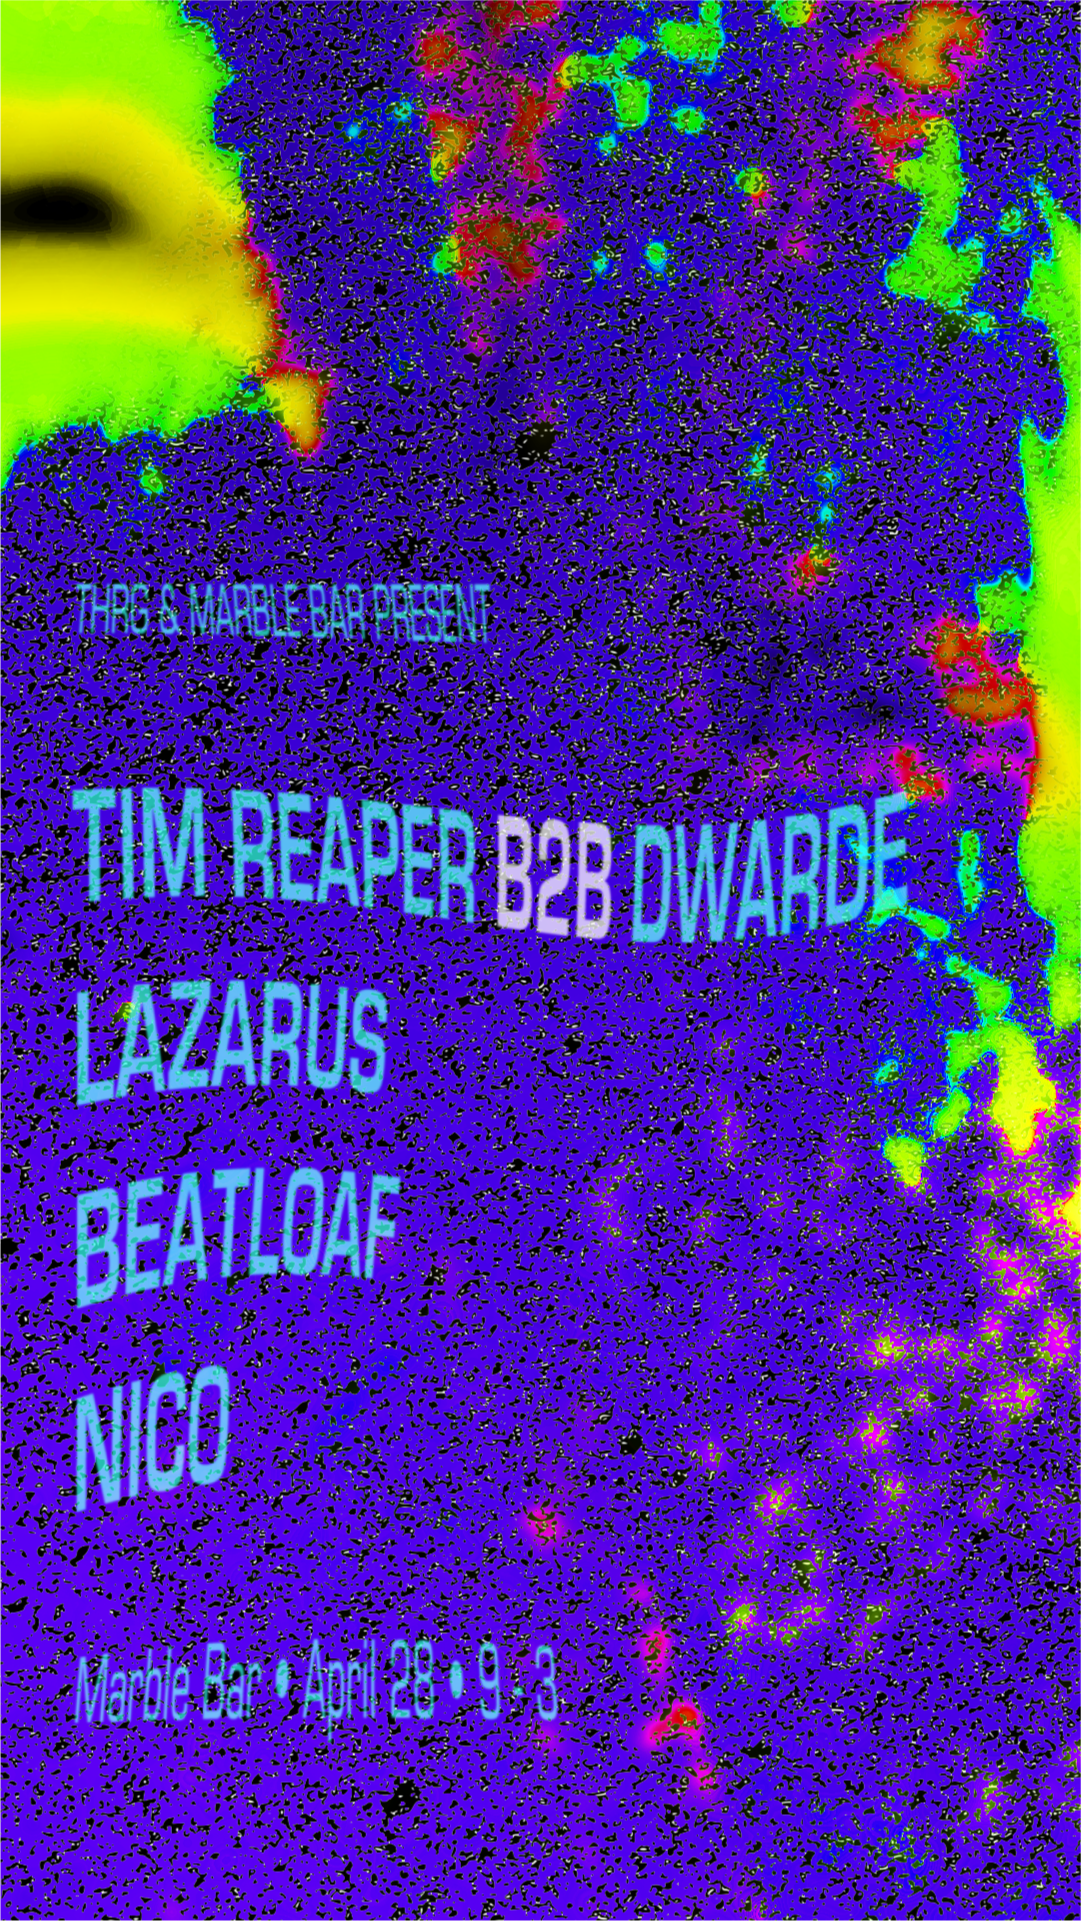 THRG & Marble Bar pres. Tim Reaper & Dwarde with Lazarus - フライヤー表